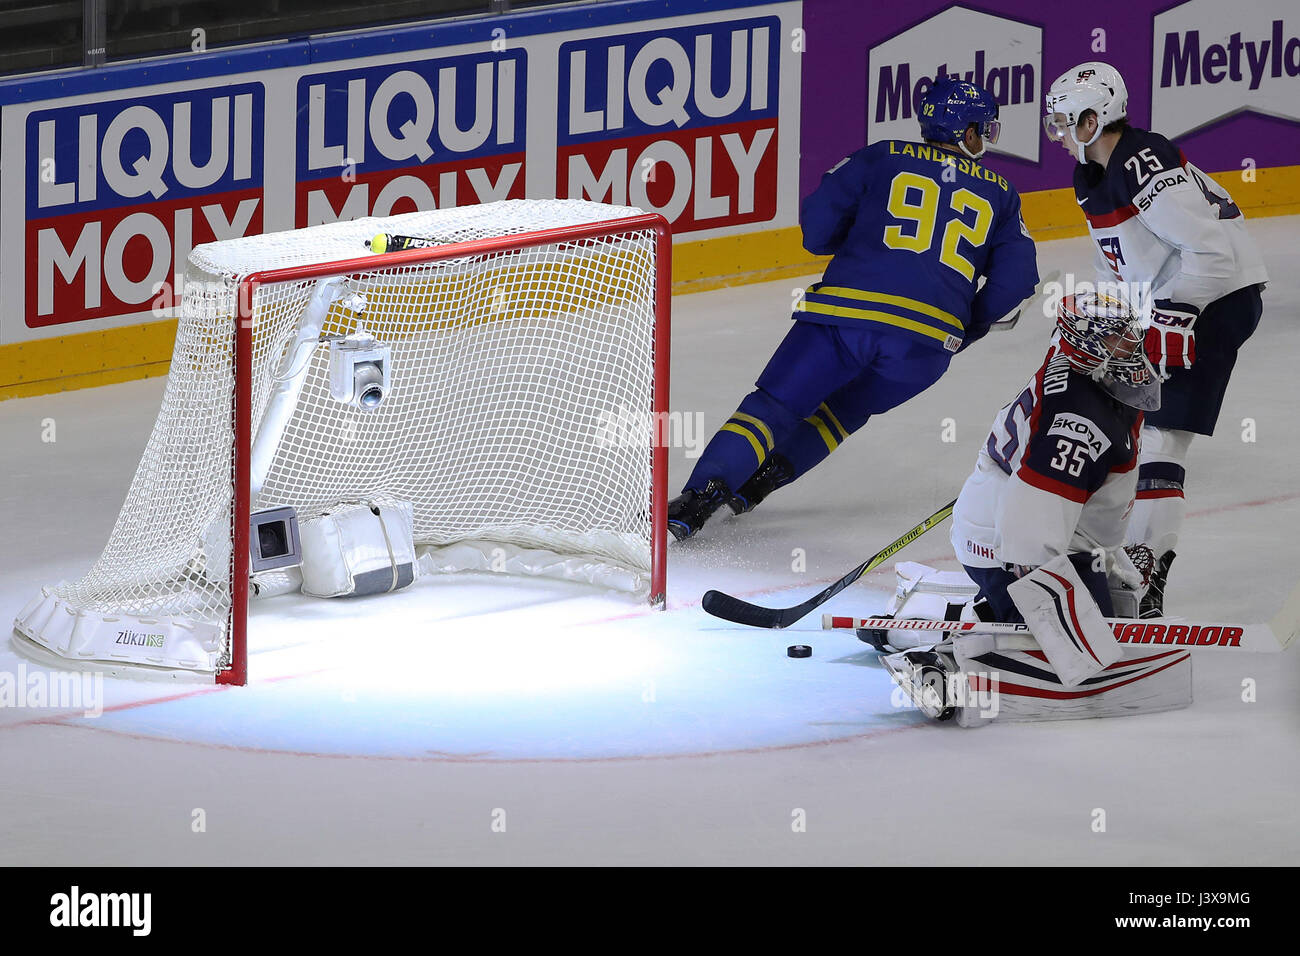 Cologne, USA fails to save during the 2017 IIHF Ice Hockey World Championship Preliminary Round Group A Game between the USA and Sweden in Cologne. 8th May, 2017. Jimmy Howard(C), goalkeeper of the United States fails to save during the 2017 IIHF Ice Hockey World Championship Preliminary Round Group A Game between the United States and Sweden in Cologne, Germany on May 8, 2017. The United States won 4-3. Credit: Ulrich Hufnagel/Xinhua/Alamy Live News Stock Photo